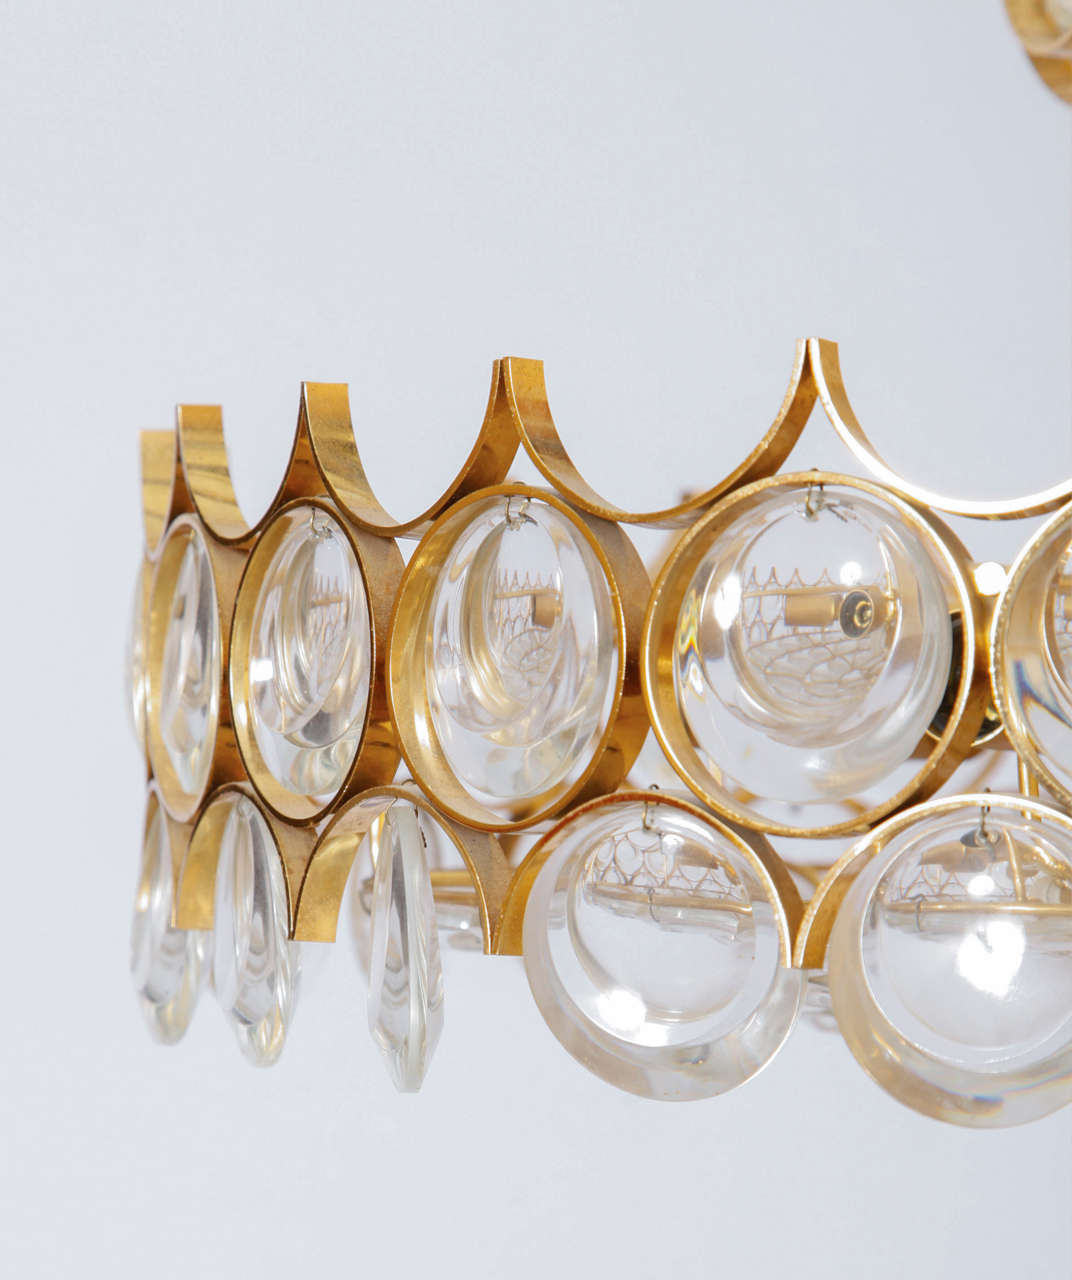 German Gilded Brass and Handmade Crystals Designed by Palwa